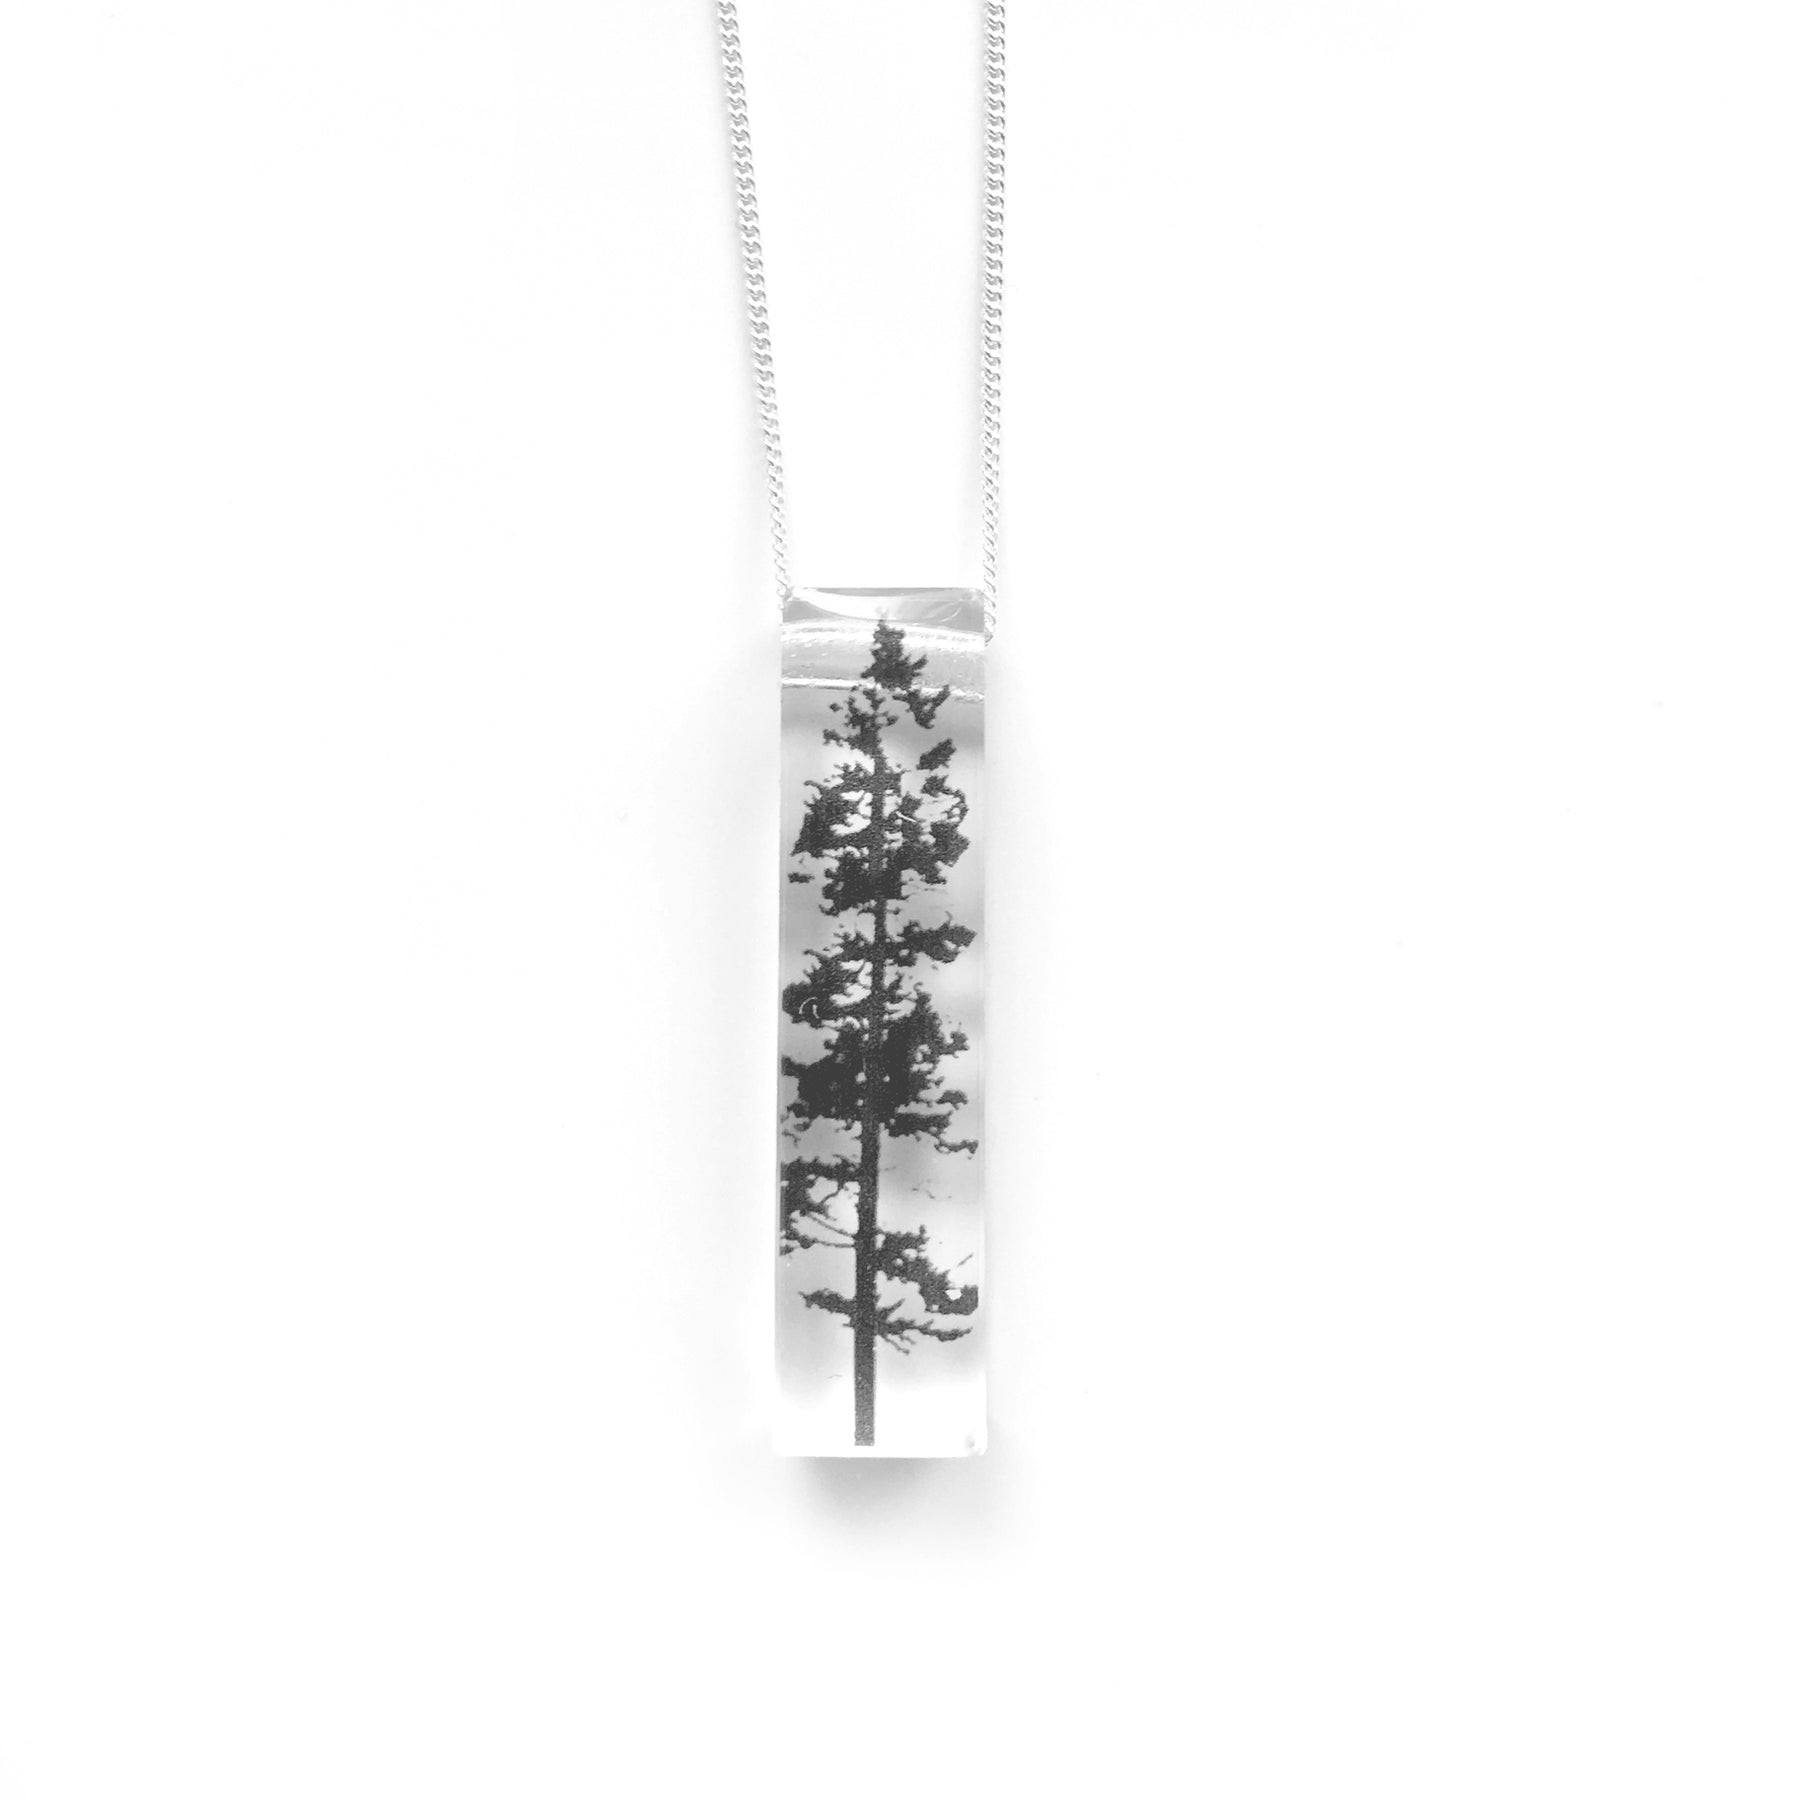 Women's jewelry - Necklace | SKINNY FOREST NECKLACE - Minter and Richter Designs